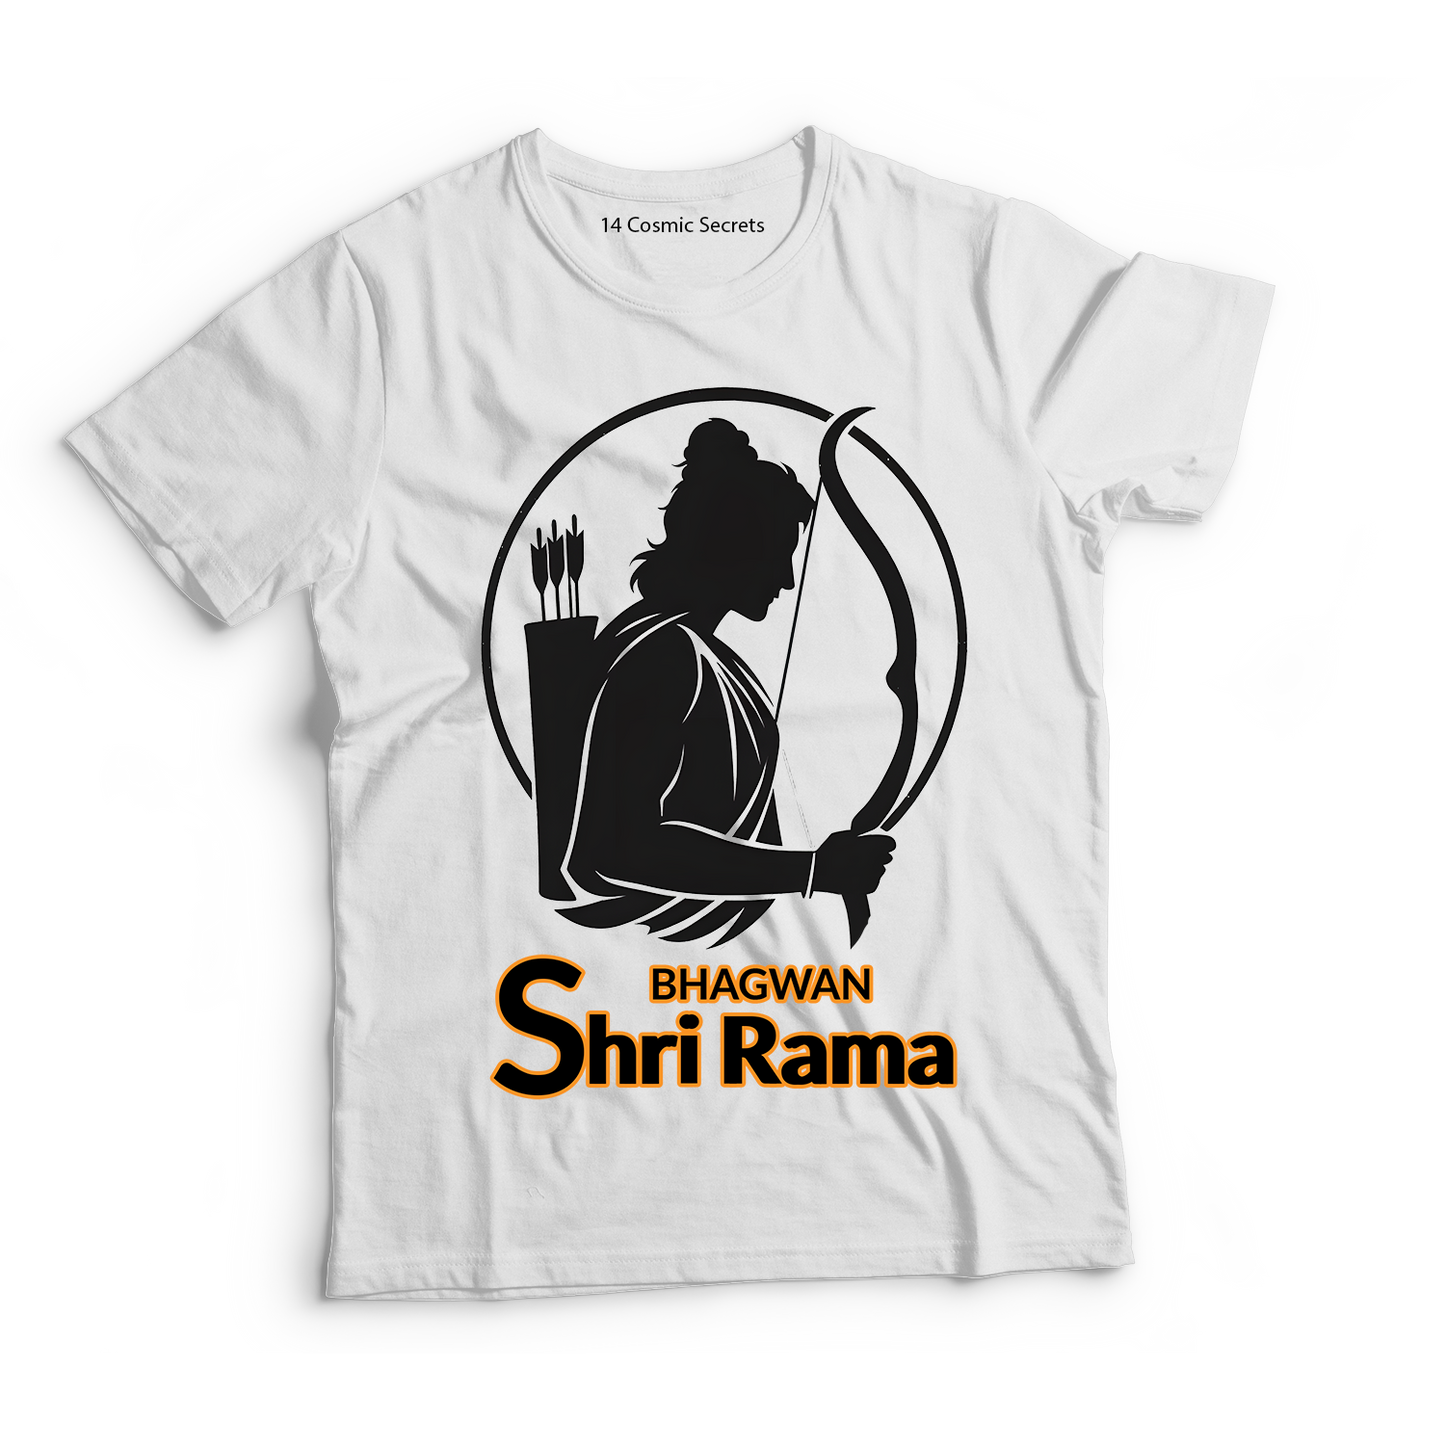 Rama's Blessings on Fabric Graphic Printed T-Shirt for Men Cotton T-Shirt Original Super Heroes of India T-Shirt